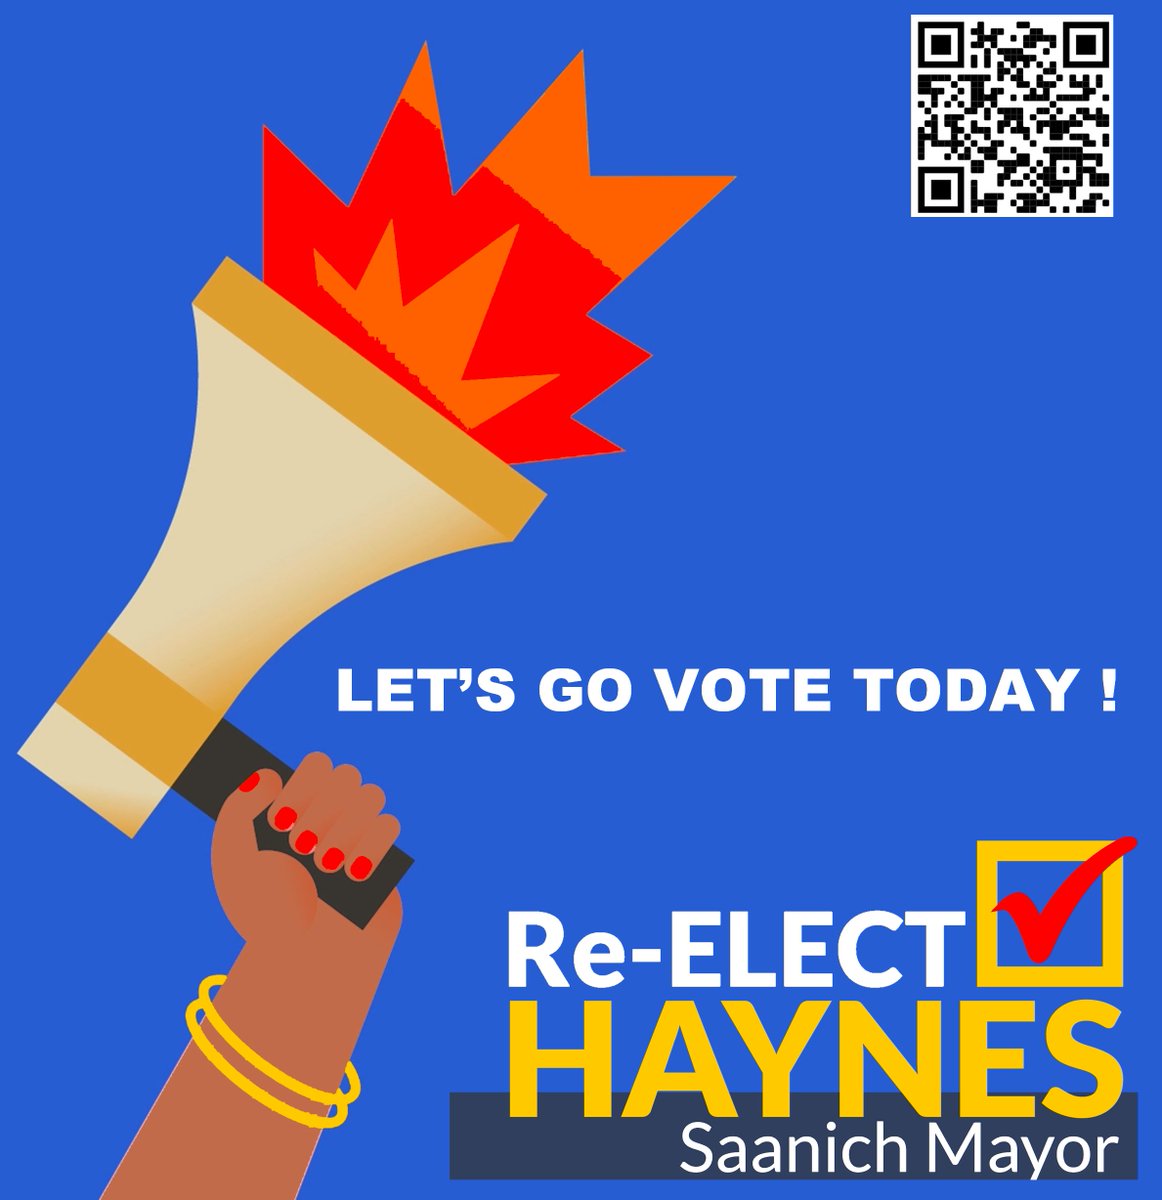 It's voting day today! Find a location close to you at saanich.ca/EN/main/local-… I'd appreciate your vote today. You can see my platform at fredhaynes.ca/platform/ #yyj #yyjpoli #saanich #SaanichVotes2022 #VoteHaynes